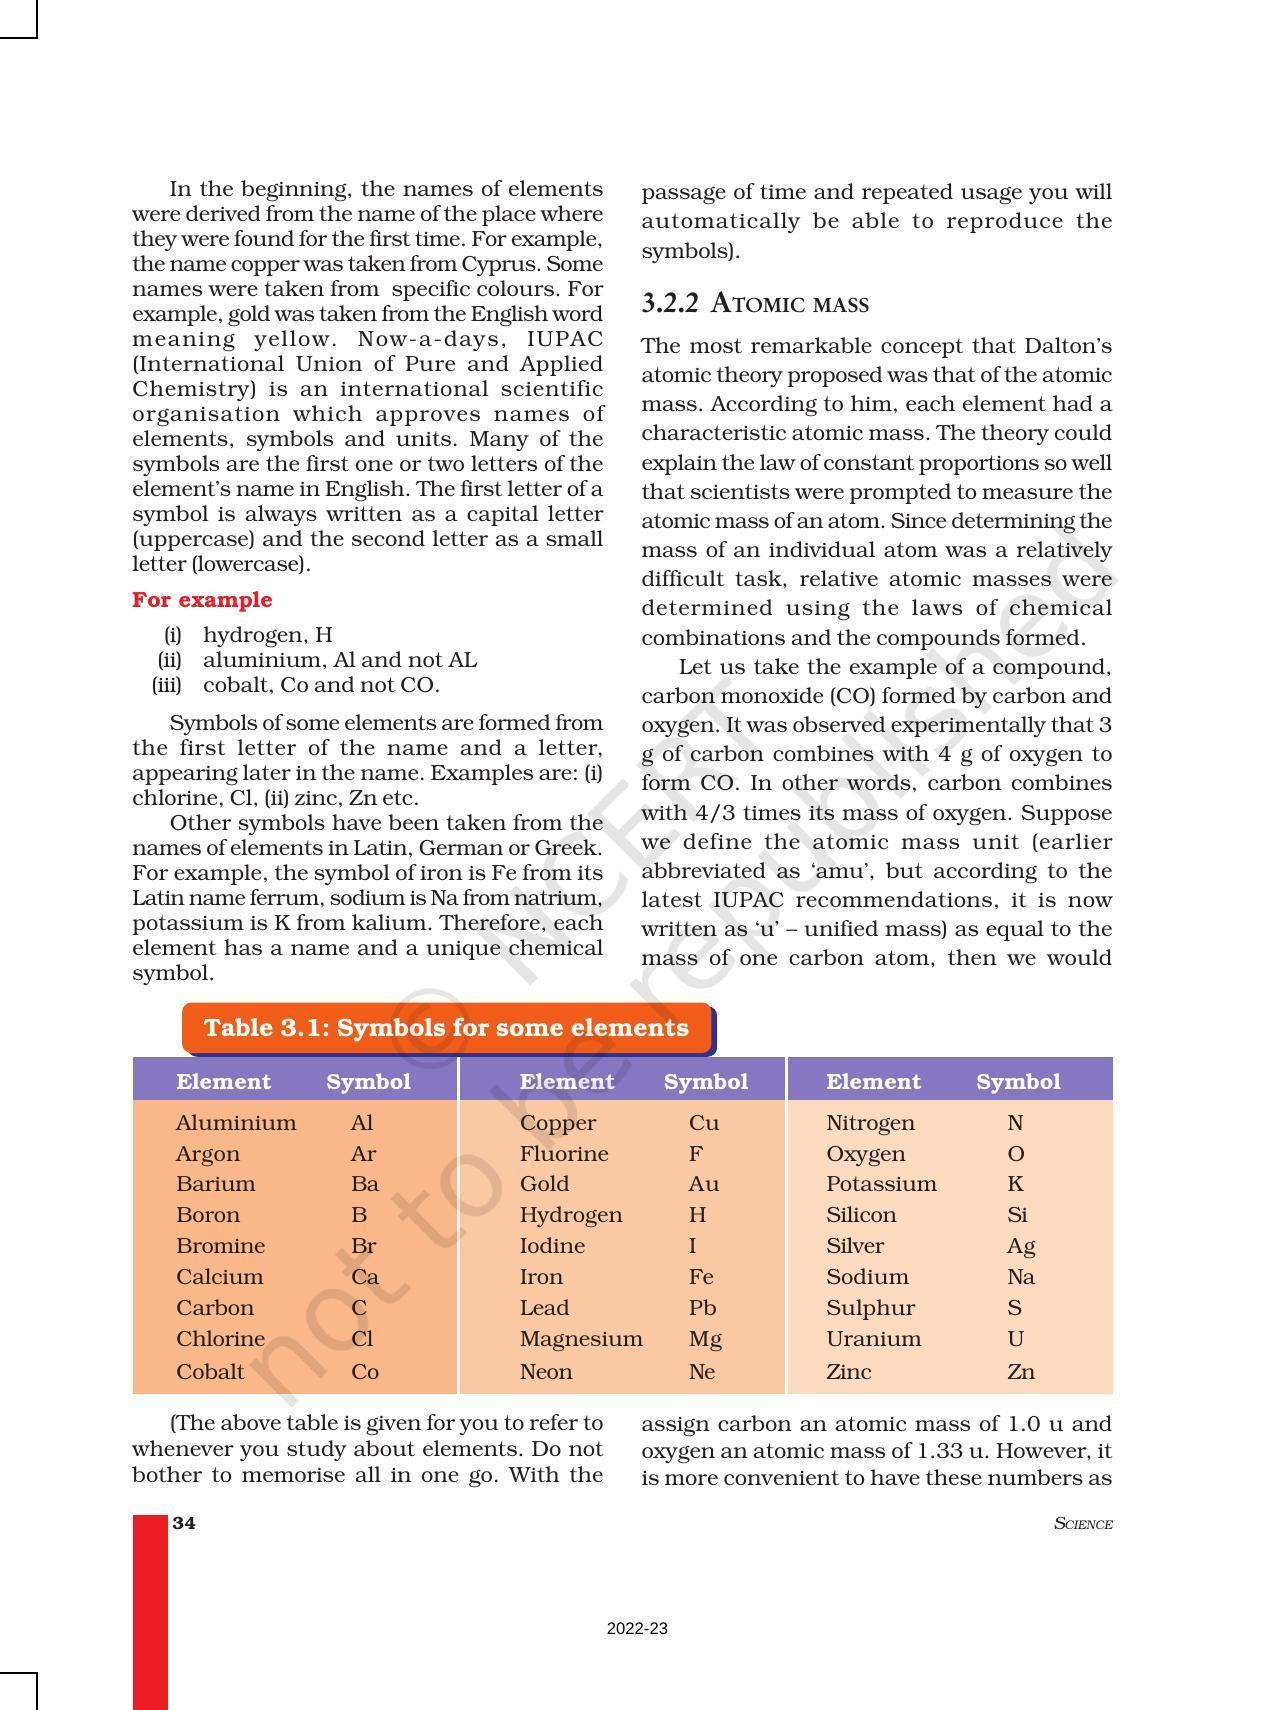 NCERT Book for Class 9 Science Chapter 3 Atoms And Molecules - Page 4